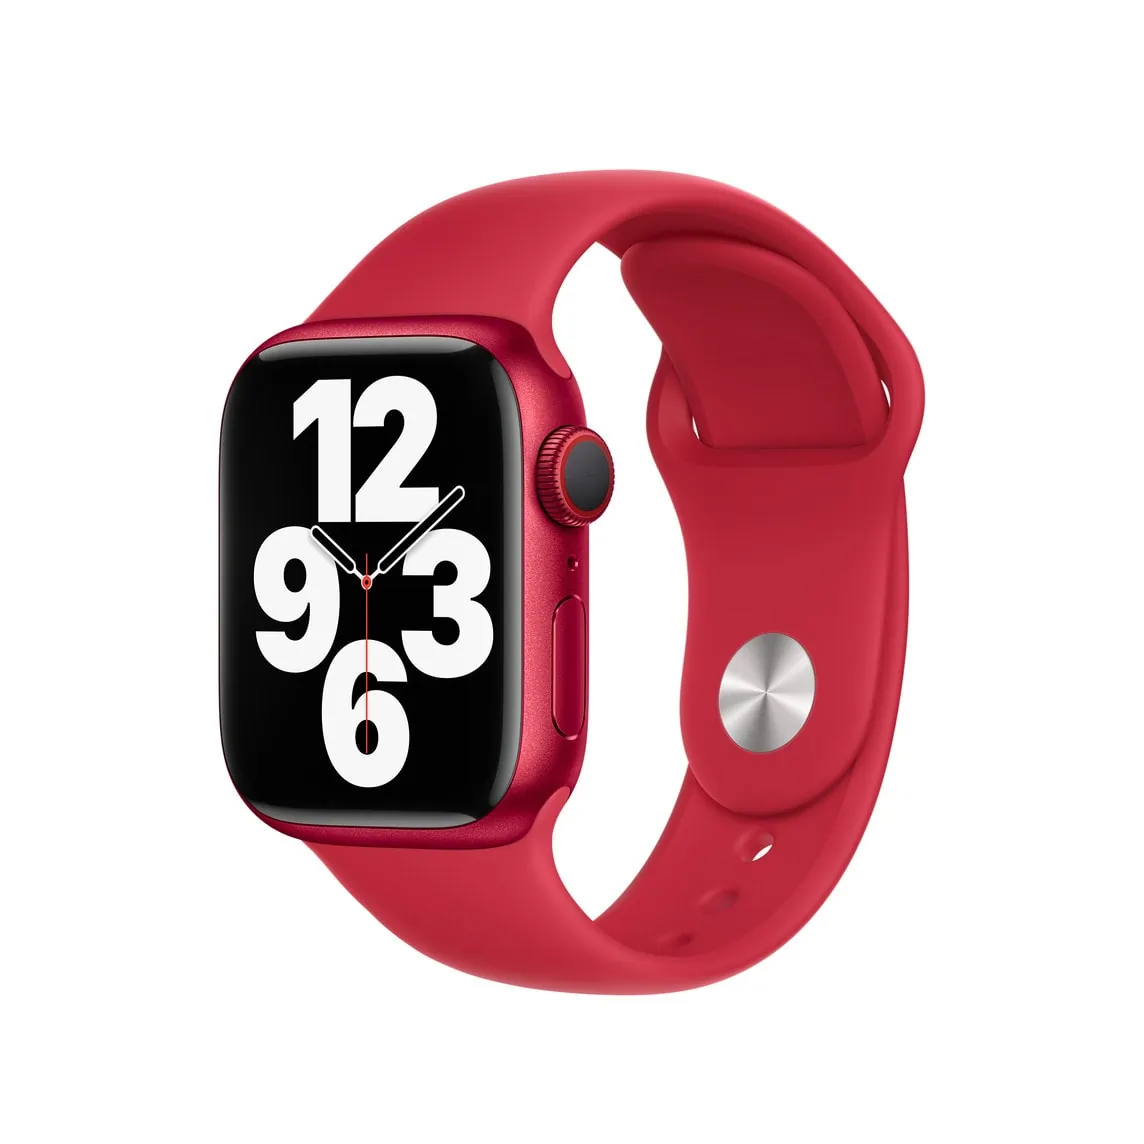 Apple Sport Band3 - Best Fitness Bands for Apple Watch – Which material & style is the best for heart rate accuracy during workouts like running or cycling?